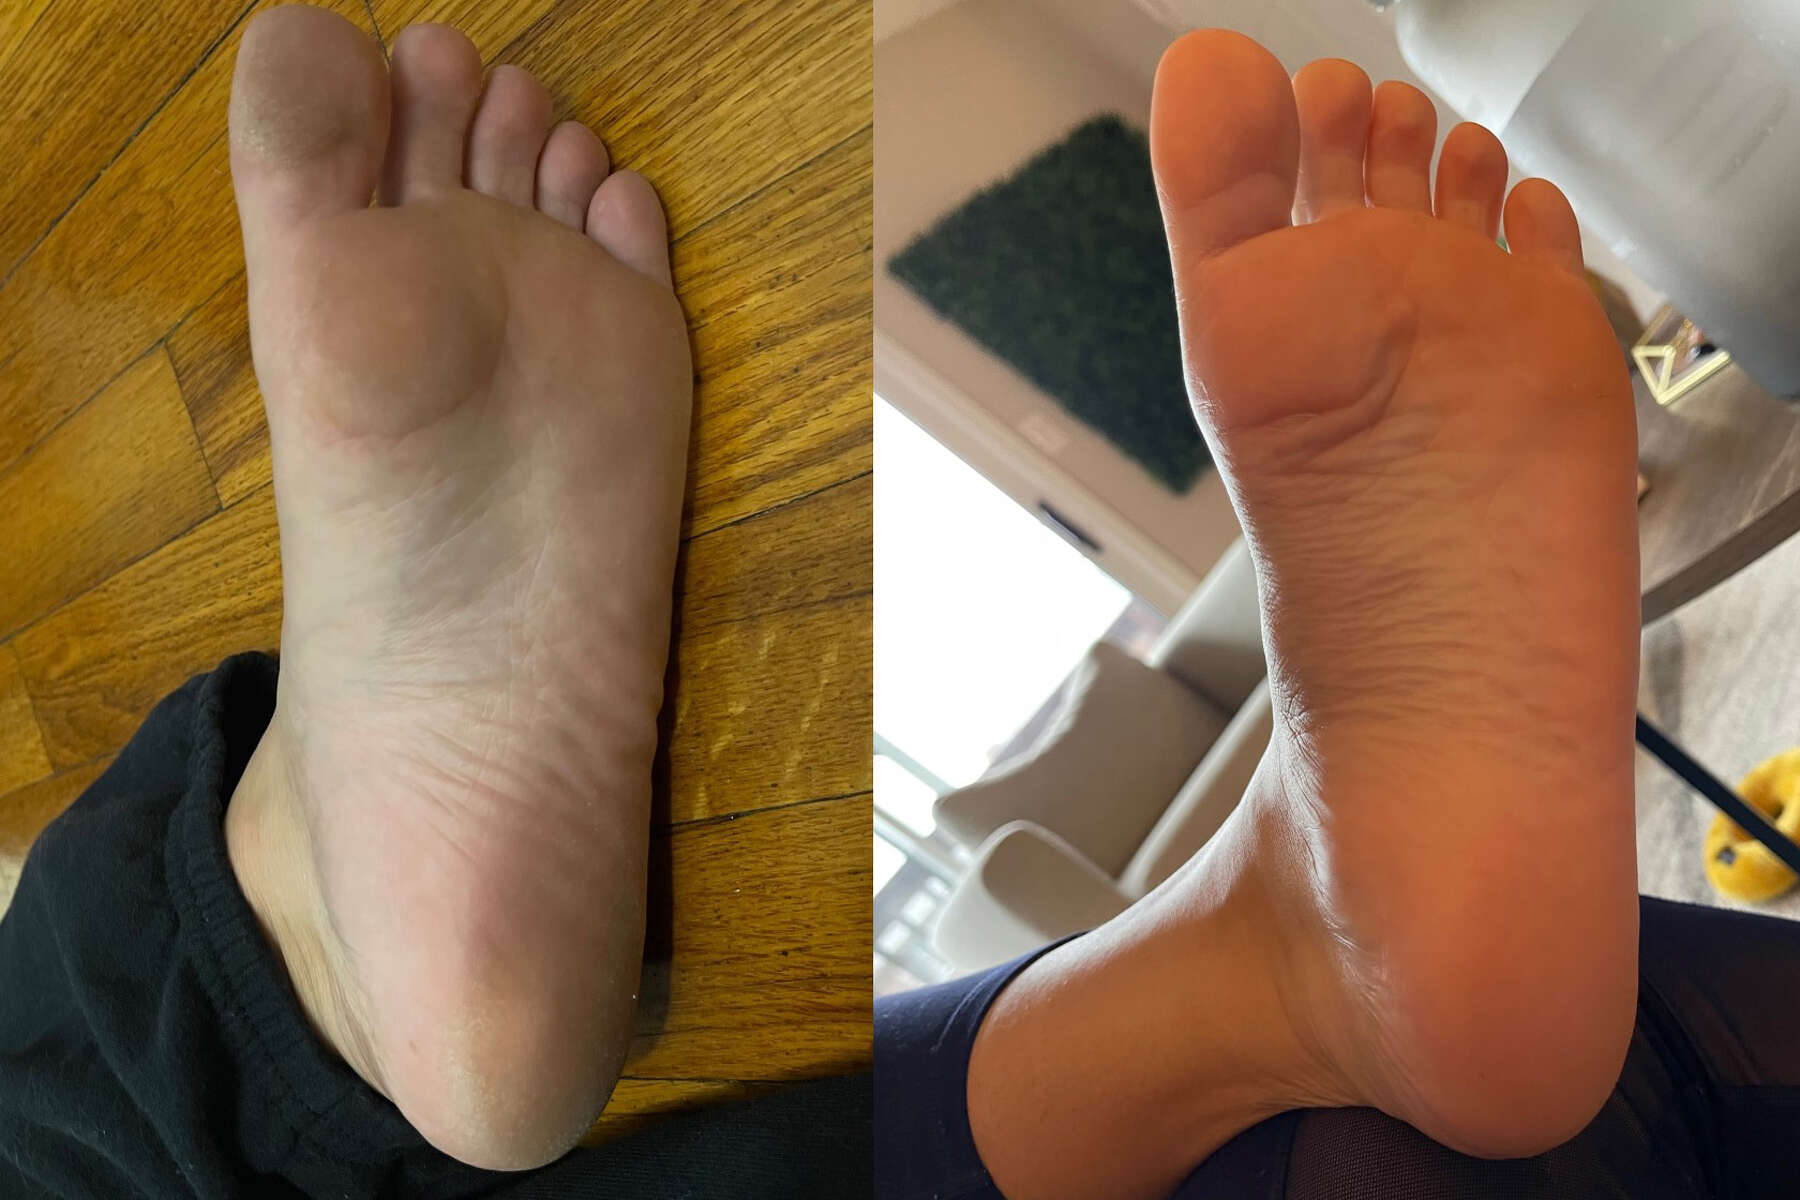 I Tried This 6 Foot Peel And Now I Have The Feet Of A Baby